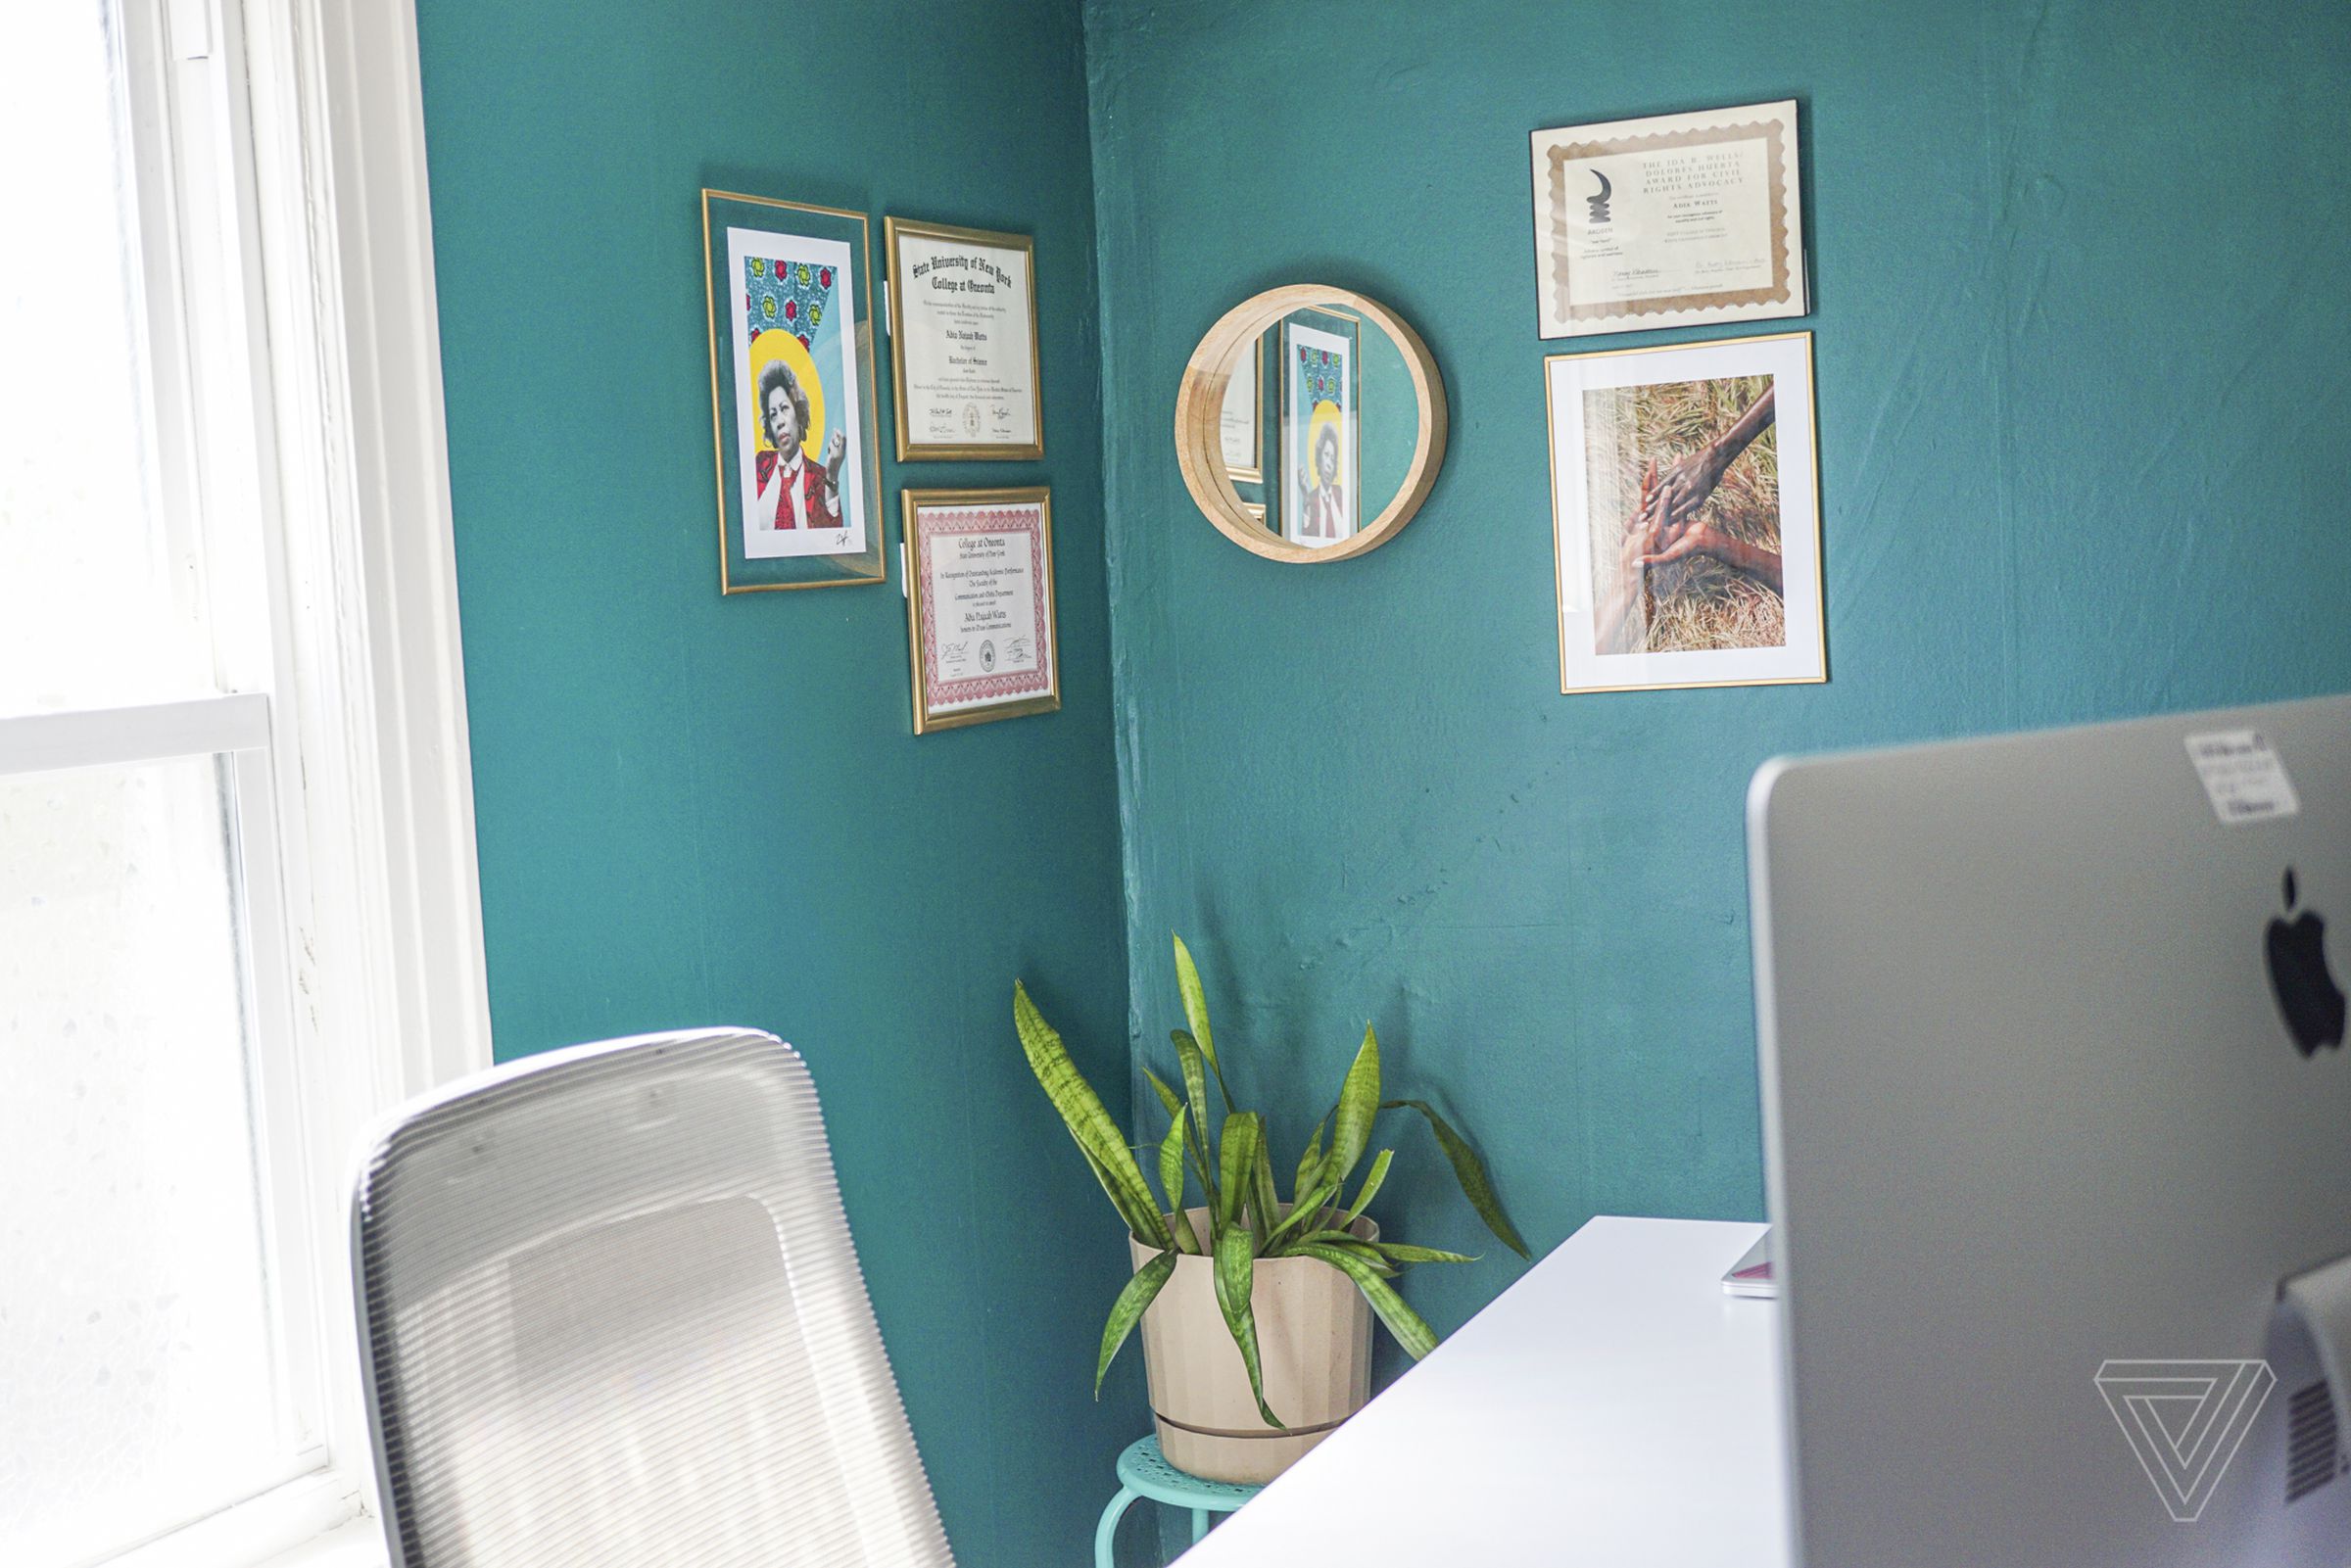 A Toni Morrison print by Zoë Sinclair (on the wall, left) and Medusa, the snake plant.